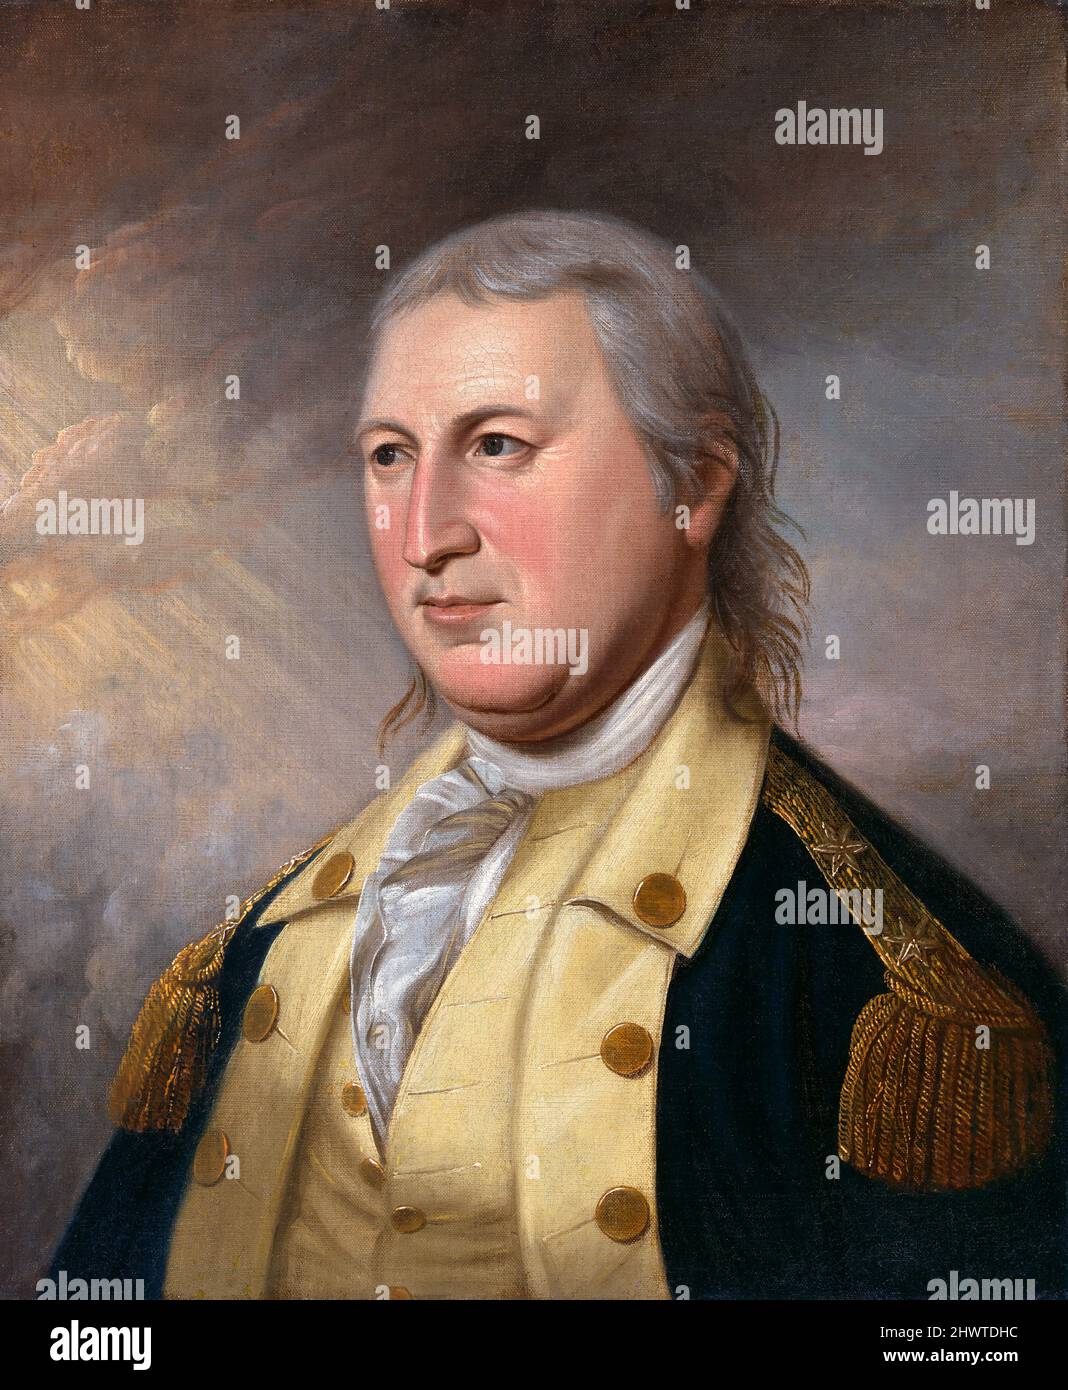 Horatio Gates (1727-1806) by James Peale, oil on canvas, 1782. General Horatio Gates was an American general during the War of Independence and is famous for victories at the Battles of Saratoga. Stock Photo